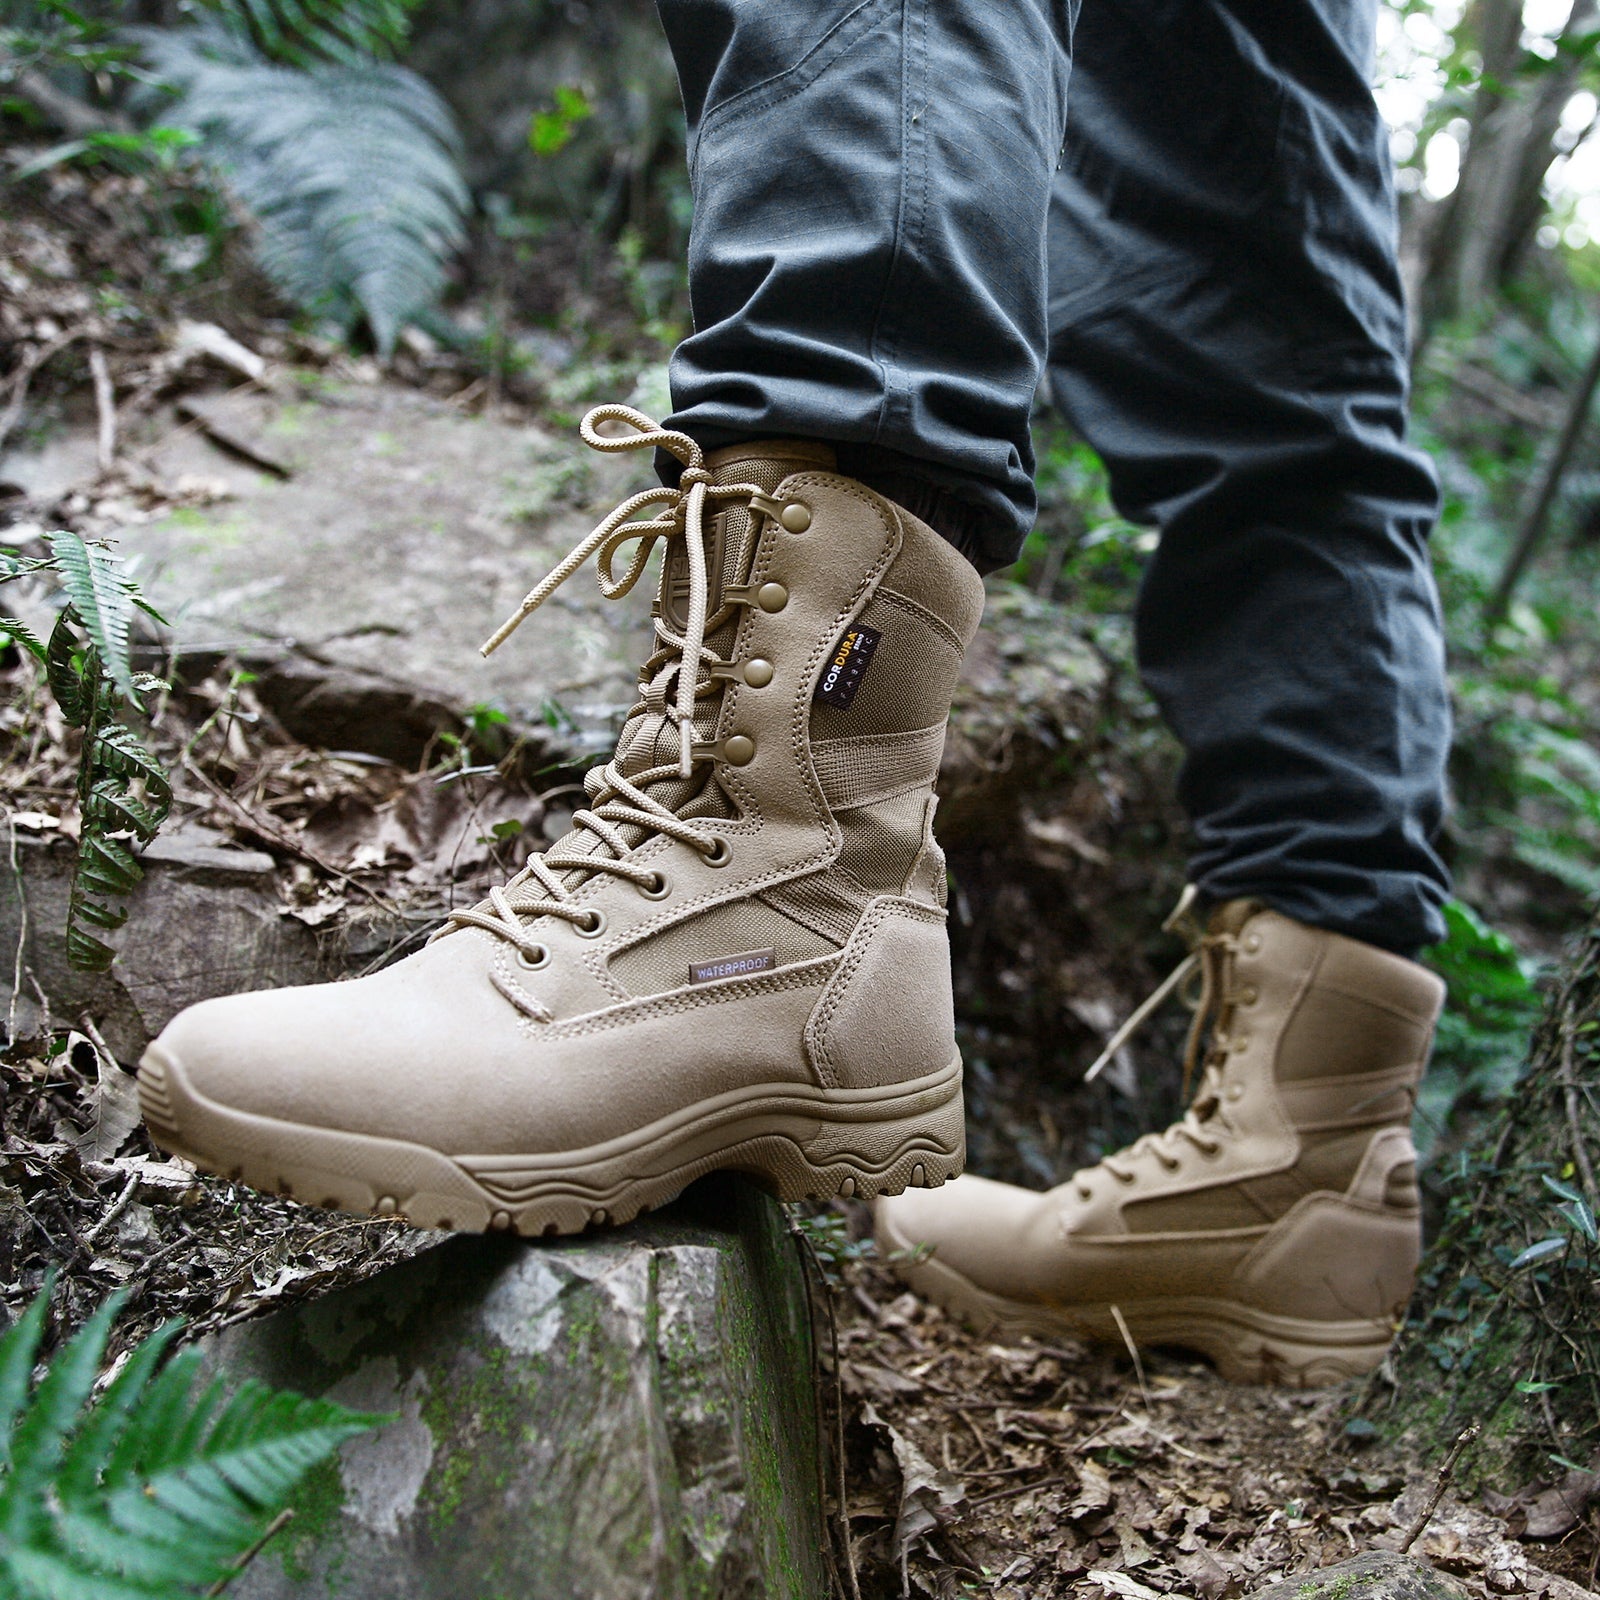 8-Inch Waterproof Thick Military Work Boots